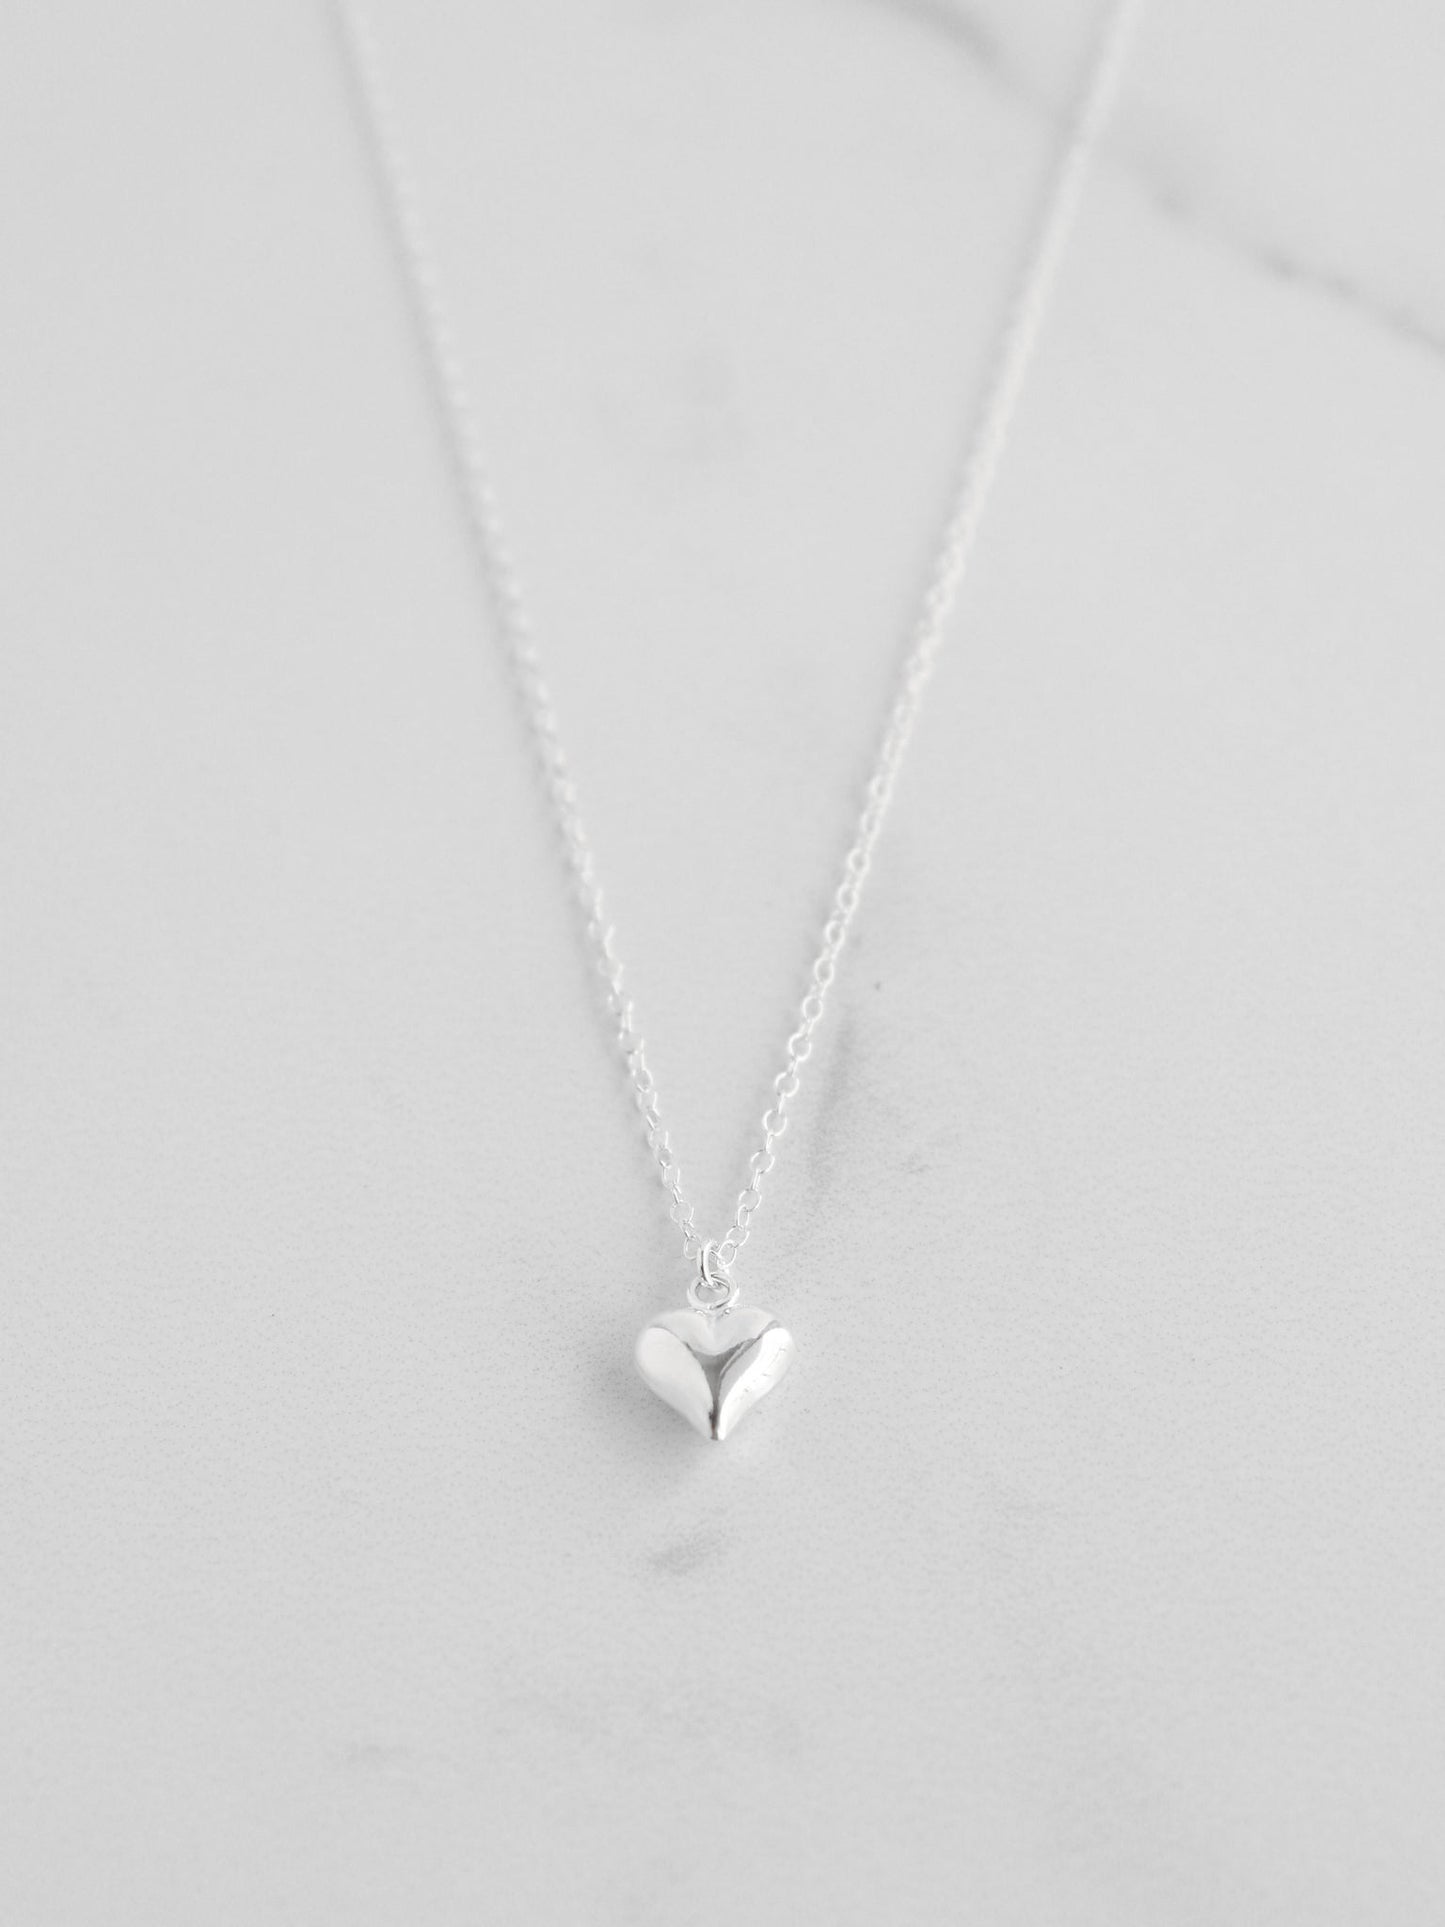 Puffed Heart Necklace - Sterling Silver - Gemlet